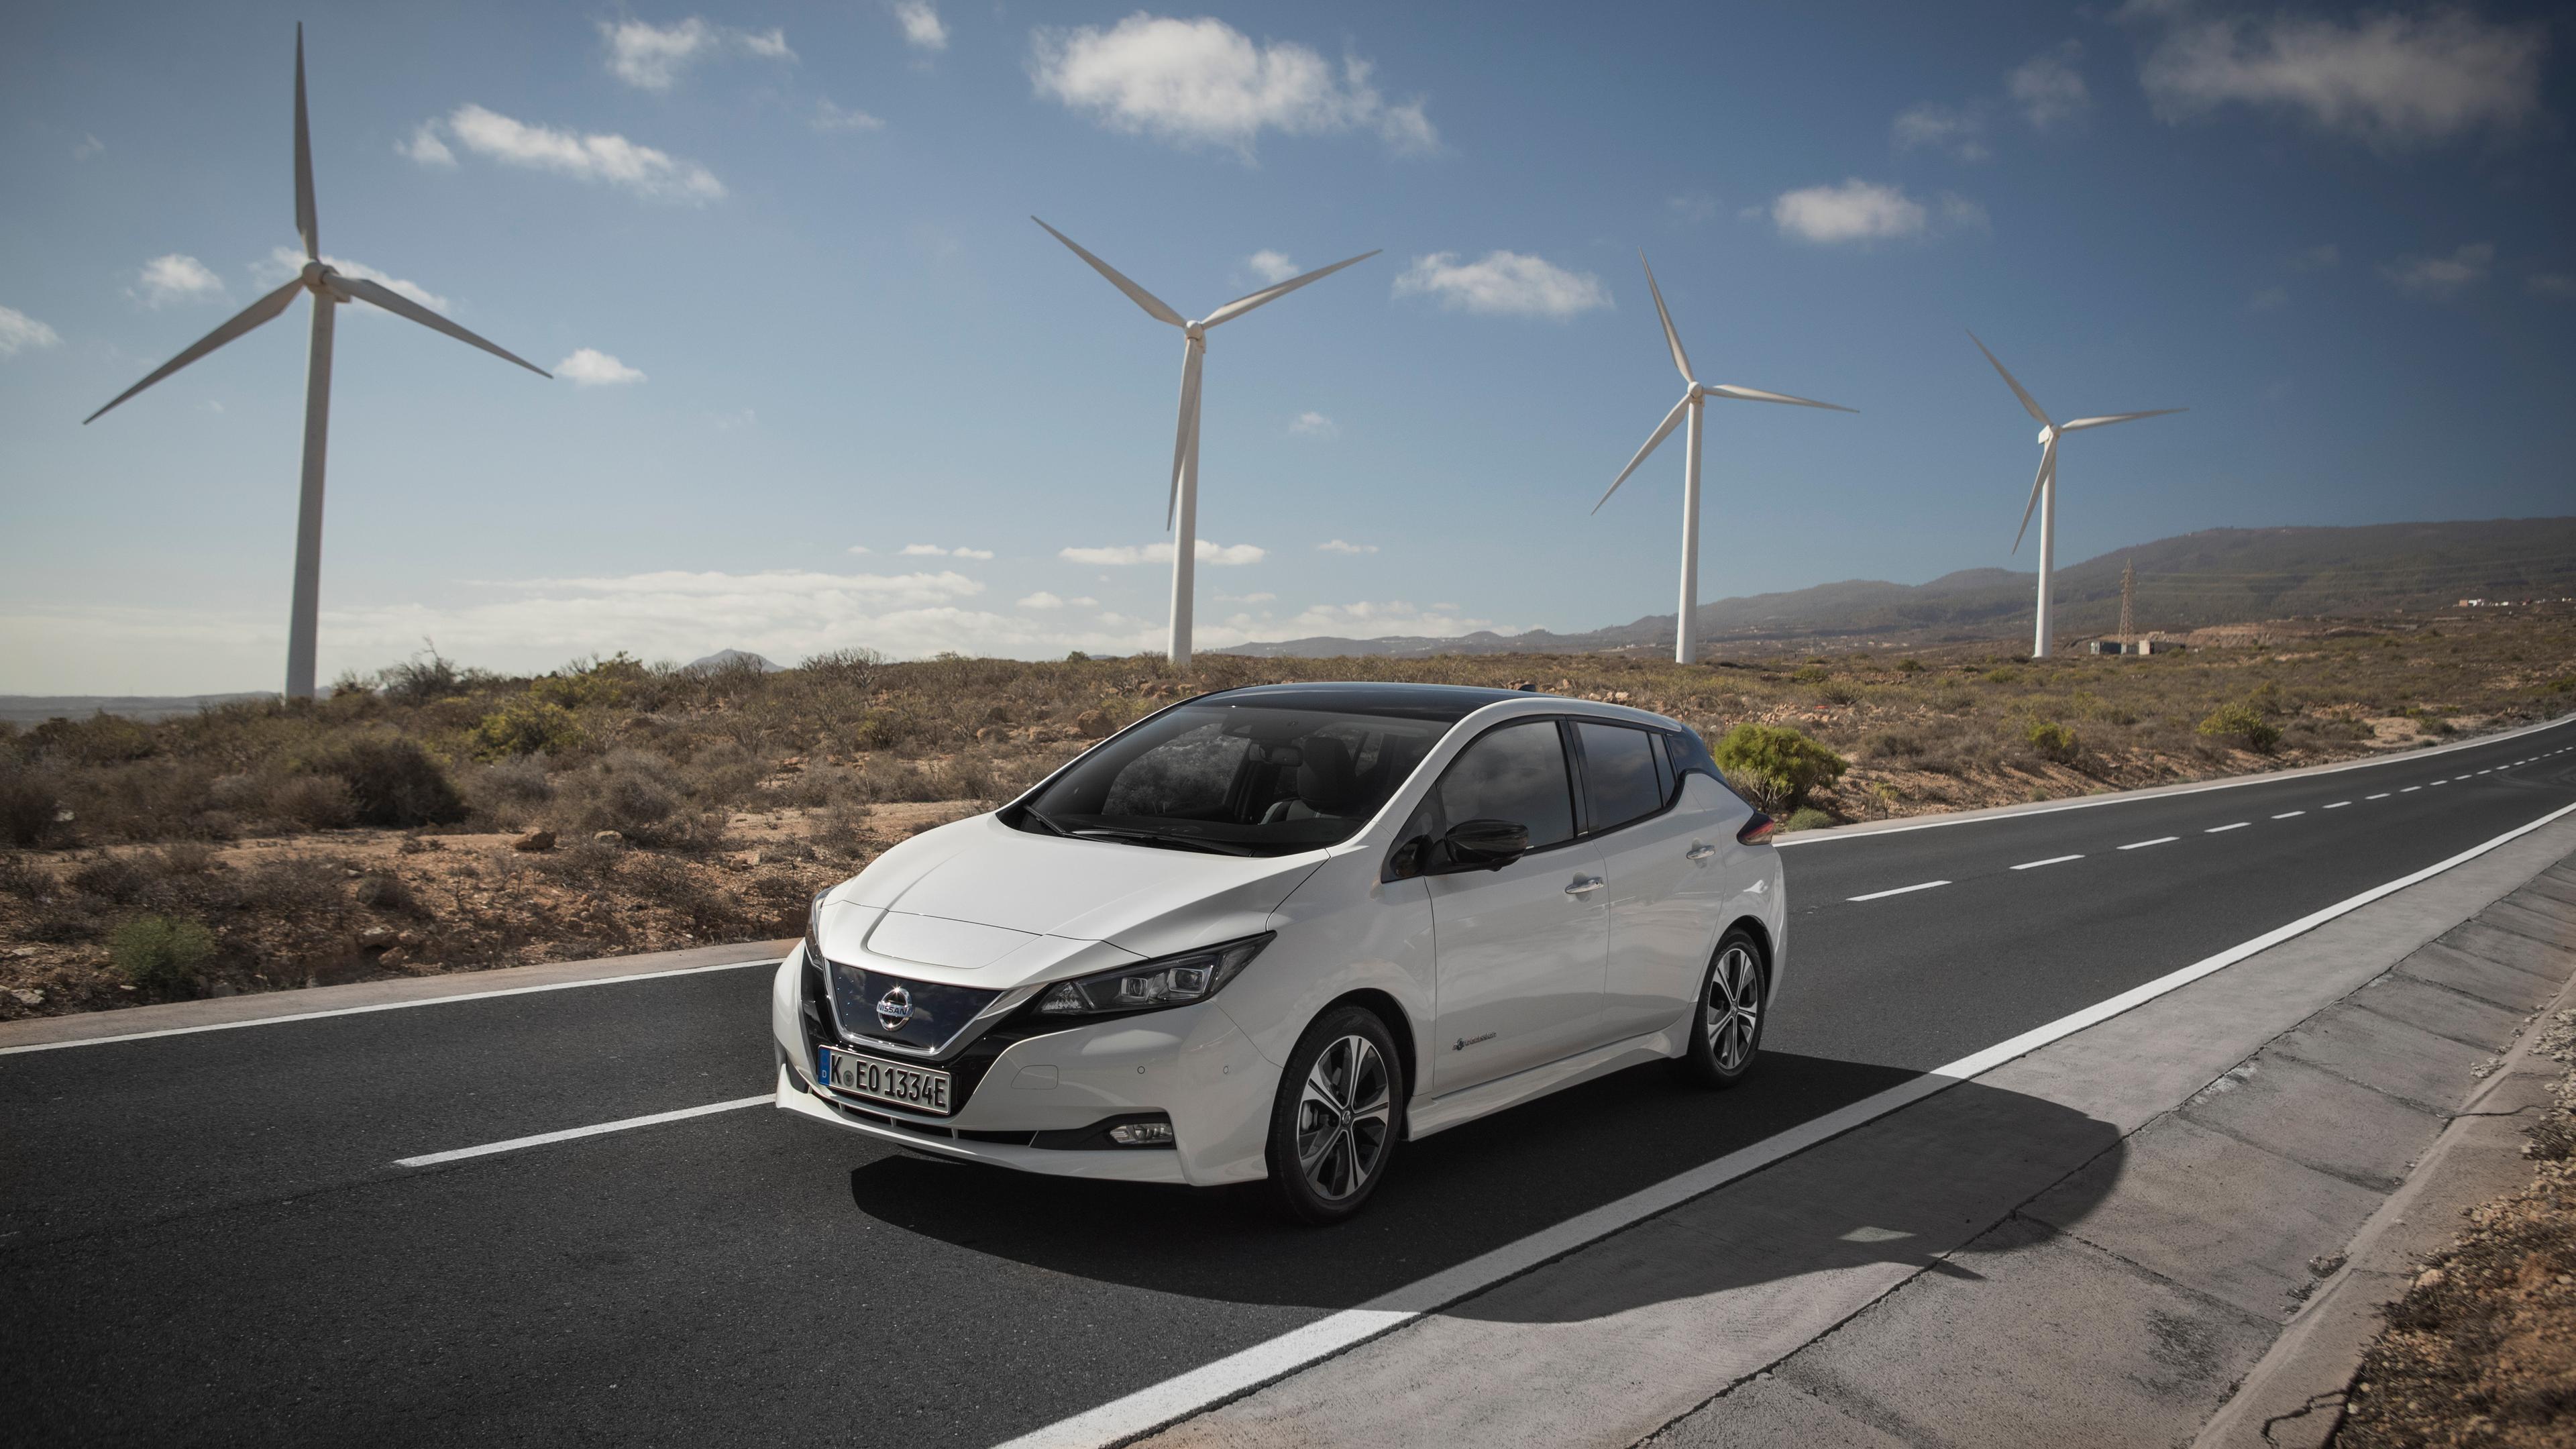 A Nissan Leaf electric car driving along a road lined with wind turbines